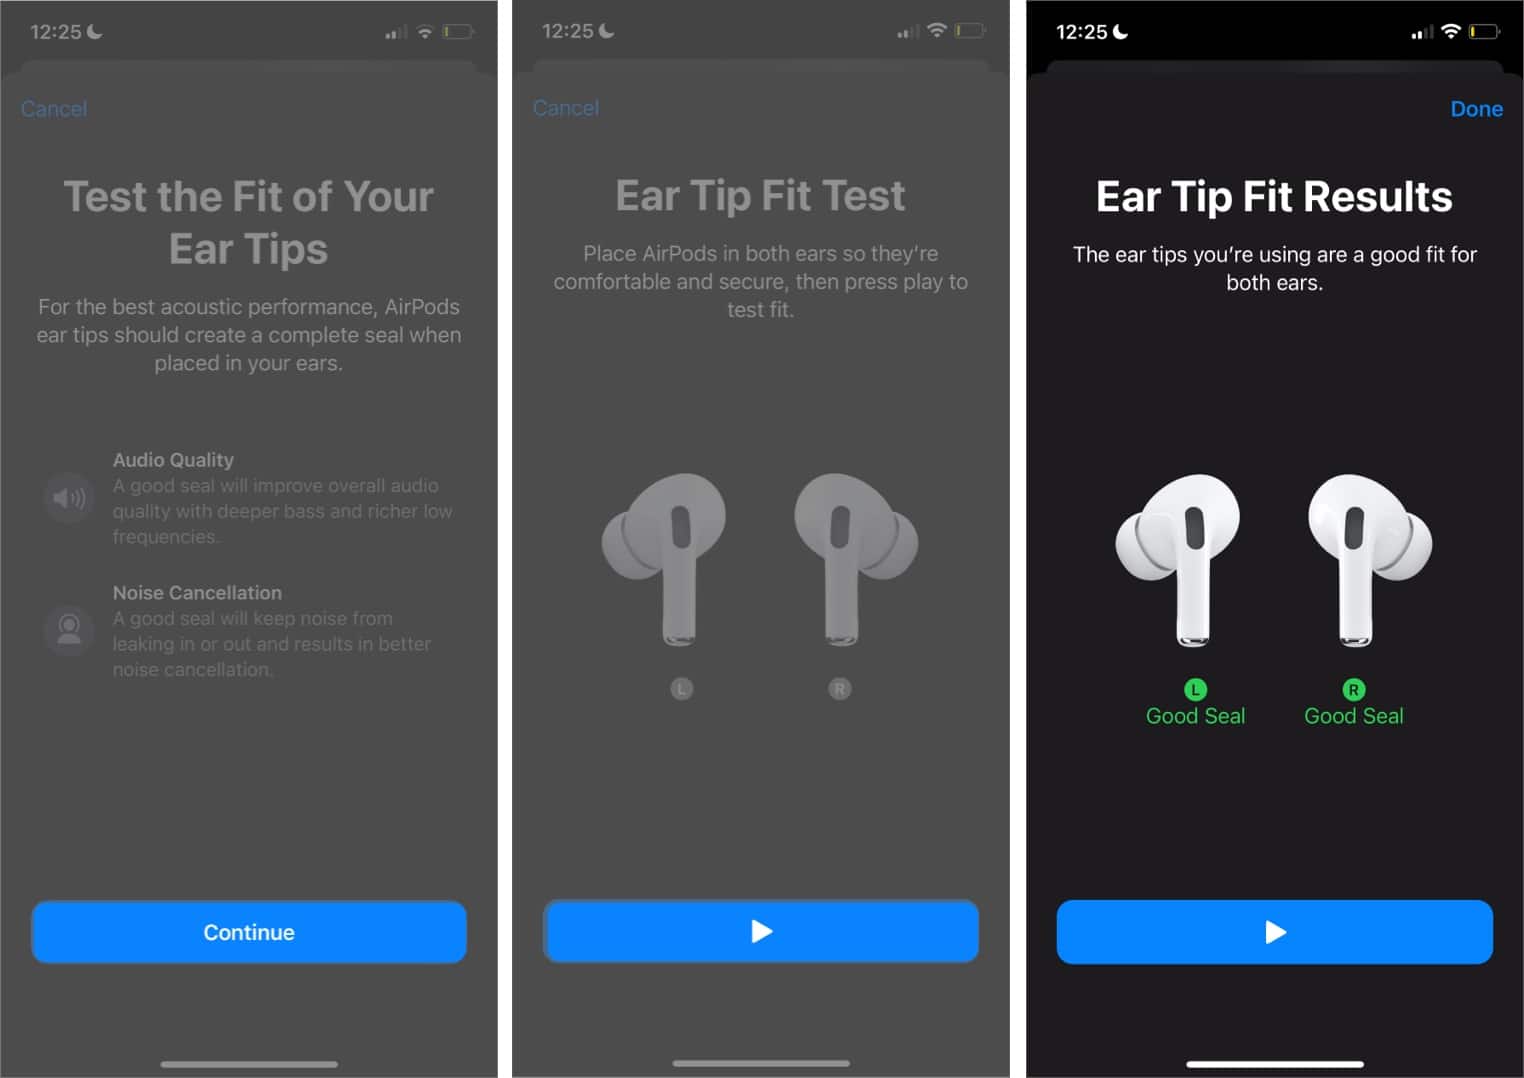 Final steps to run Ear Tip Fit Test on an iPhone for AirPods